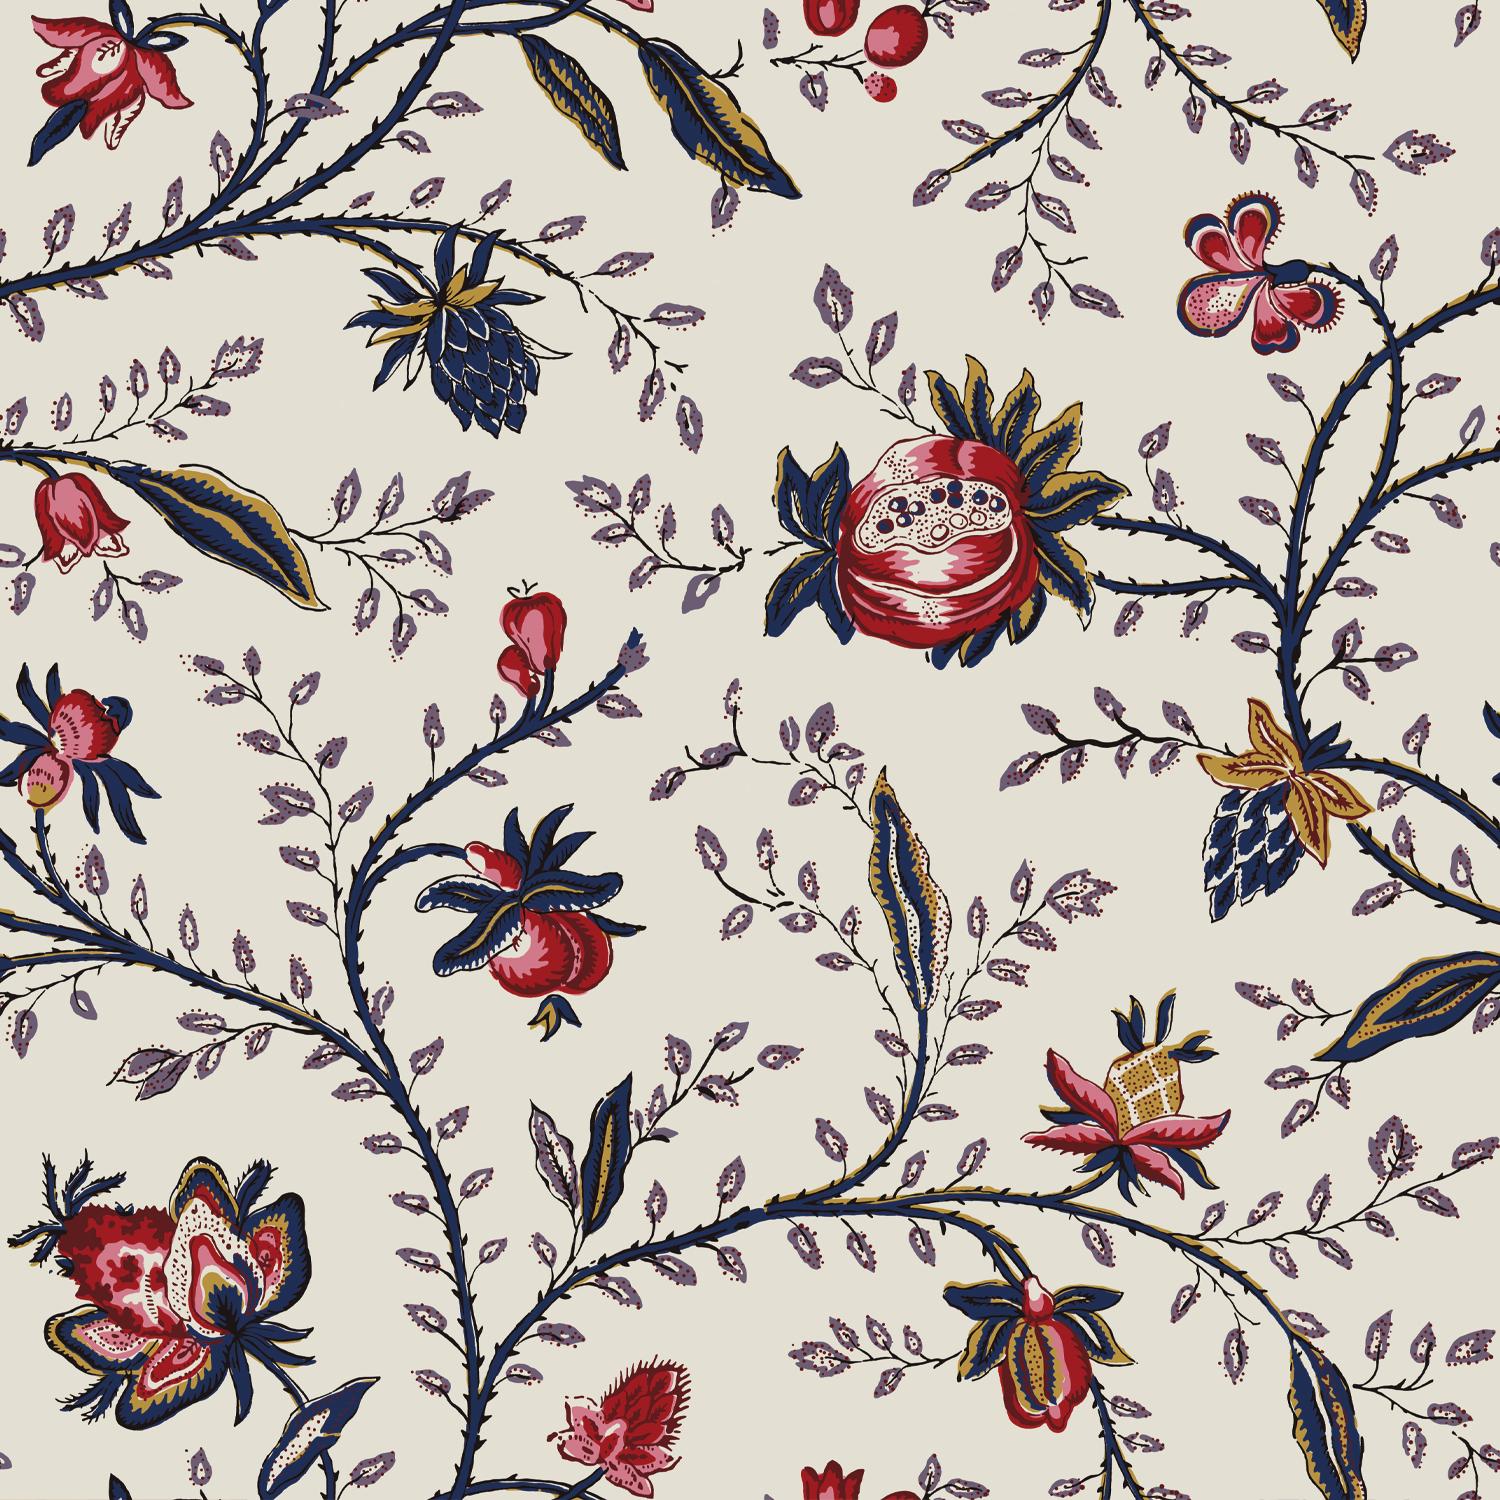 Repeat: 69,4 cm / 27.3 in

Founded in 2019, the French wallpaper brand Papier Francais is defined by the rediscovery, restoration, and revival of iconic wallpapers dating back to the French “Golden Age of wallpaper” of the 18th and 19th centuries.